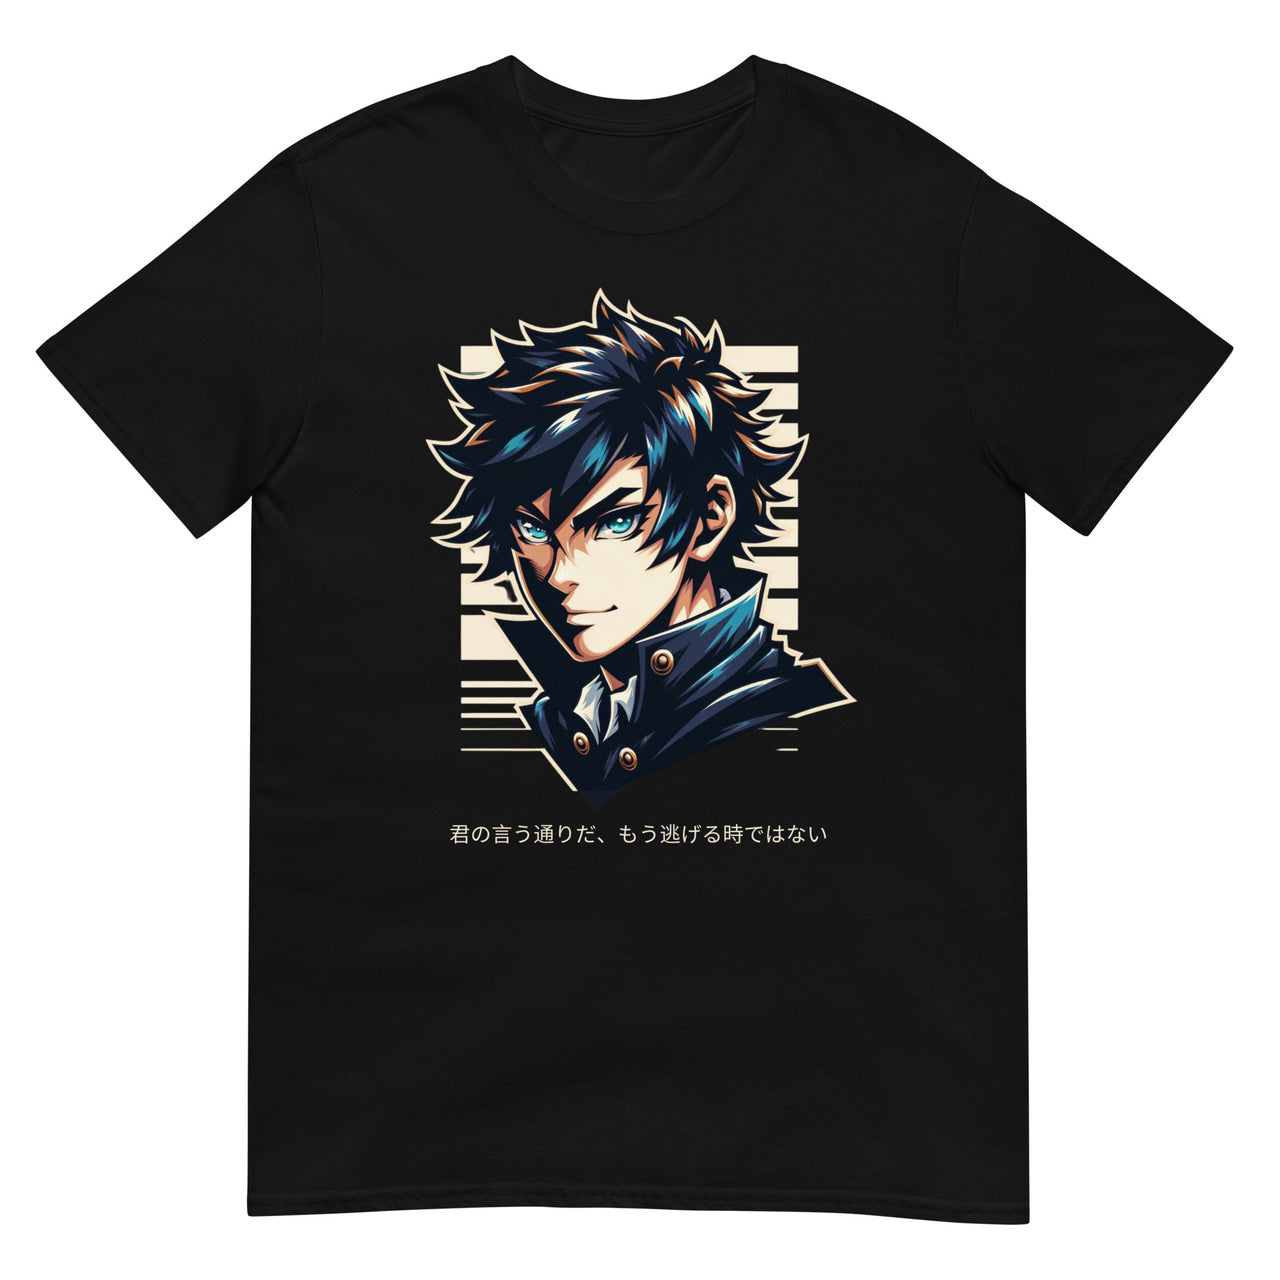 Cool Anime Boy with Determination T-Shirt